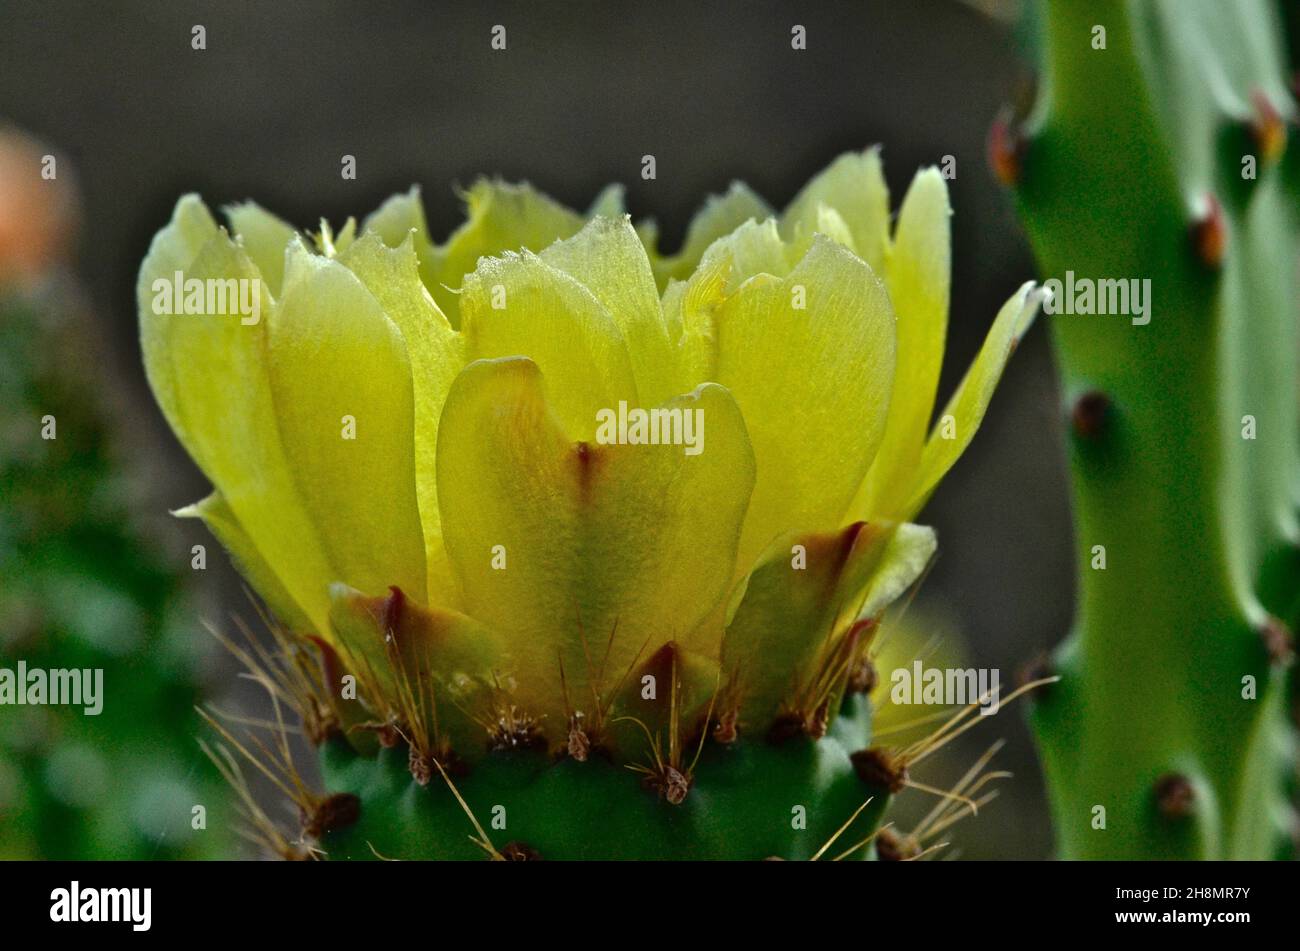 Chumbos flowers, Higos Chumbos, cactus (Cactaceae) pear (Opuntia ficus-indica) nopales (Opuntia), Mexico, Mexican tropical fruit, Mexican cuisine Stock Photo